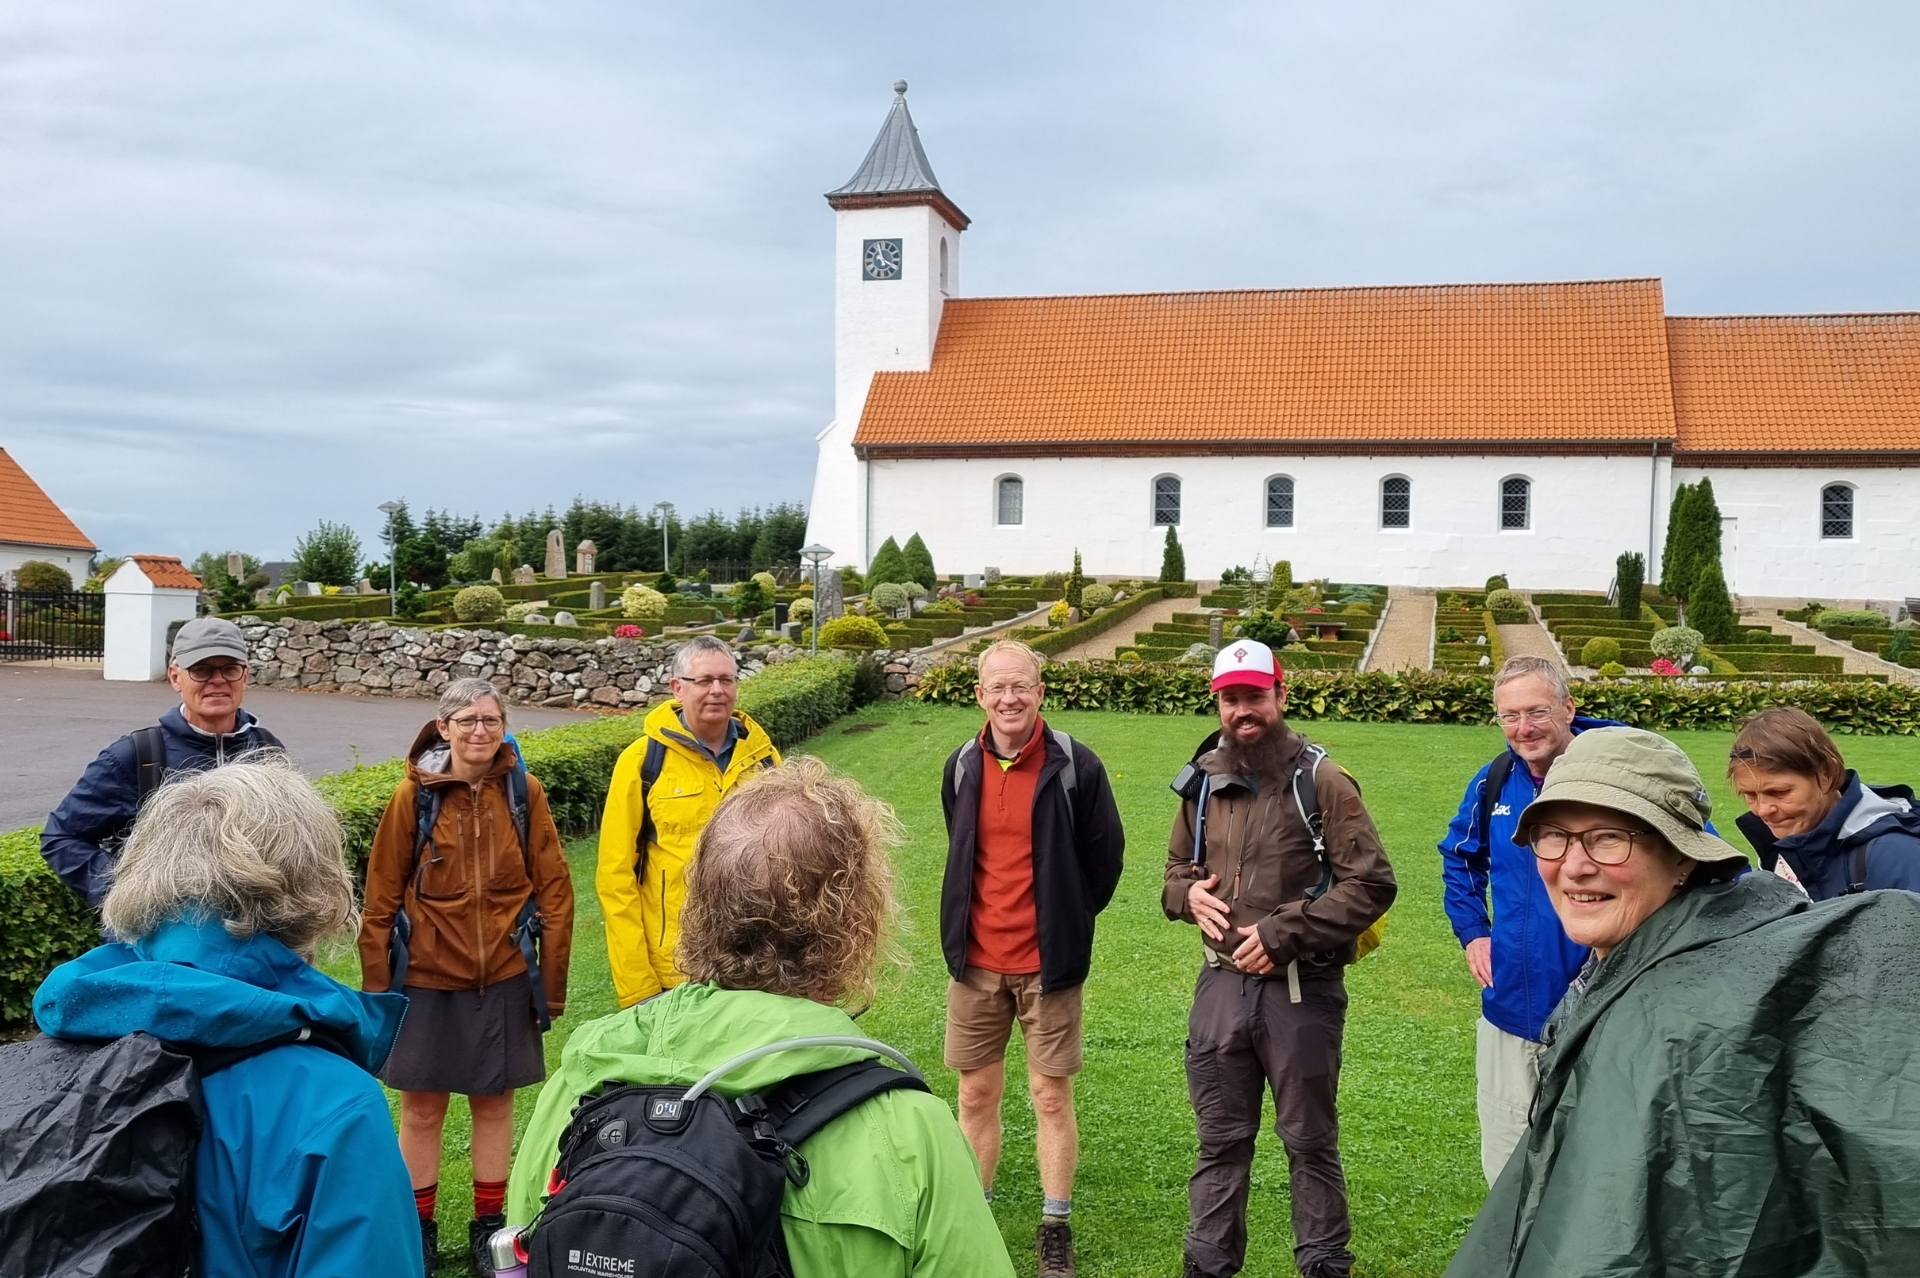 Group of people in walking gear gathered on a green outside a church on a cloudy day